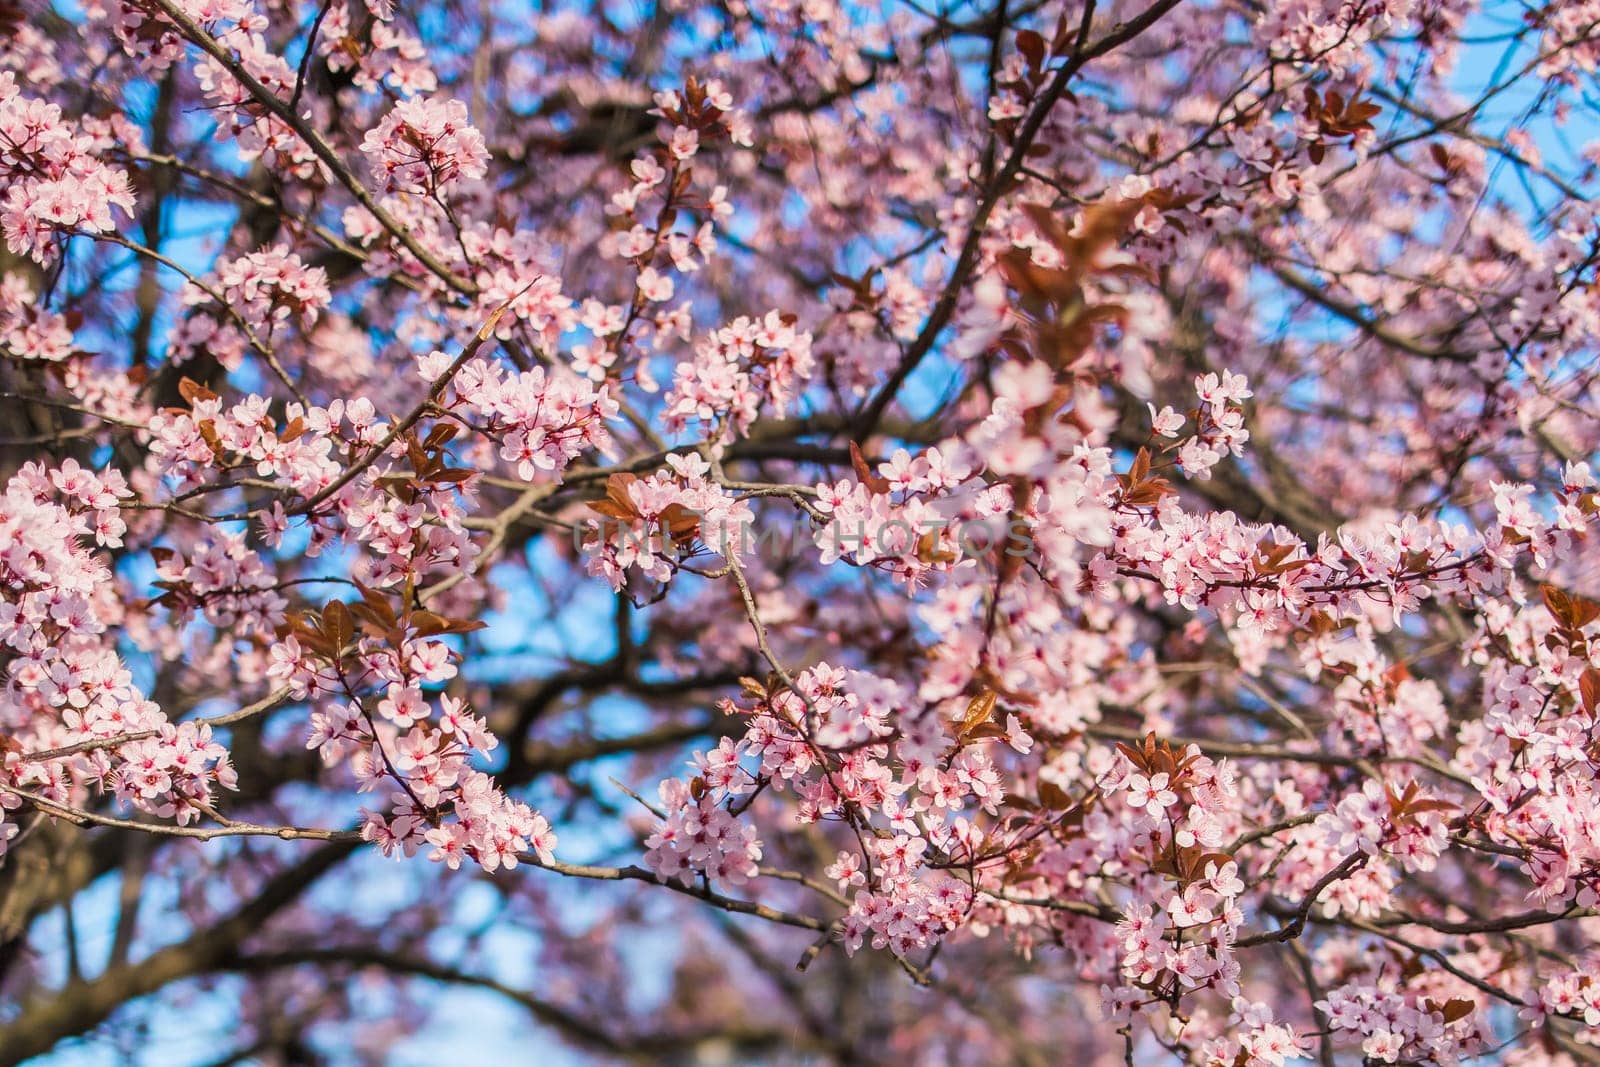 Selective focus of beautiful branches of pink Cherry blossom on the tree under blue sky, Beautiful Sakura flowers during spring season in the park, Nature floral background with copy space. Blooming and blossom by Satura86